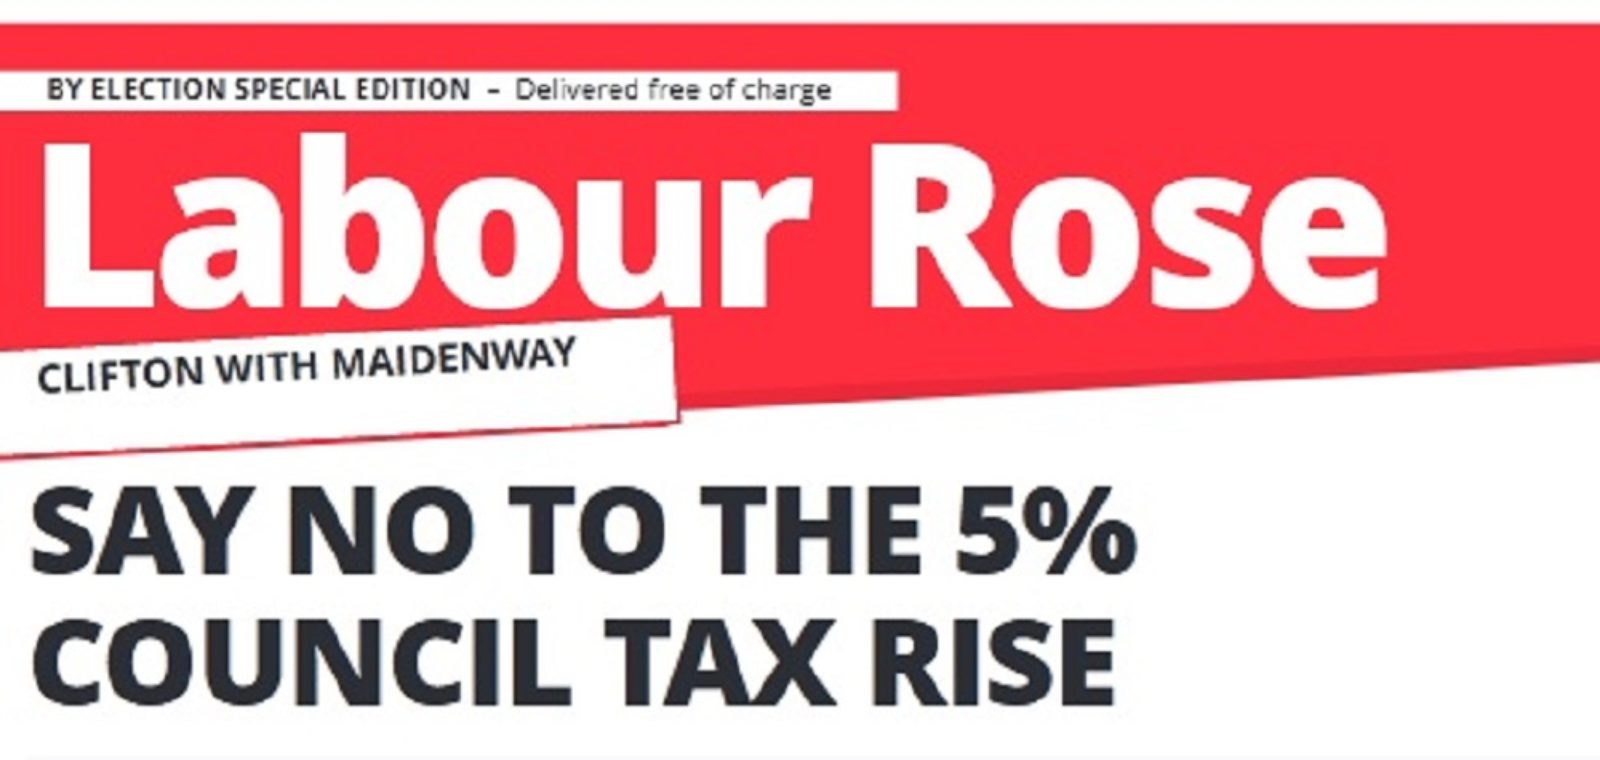 Election Special - Labour Rose